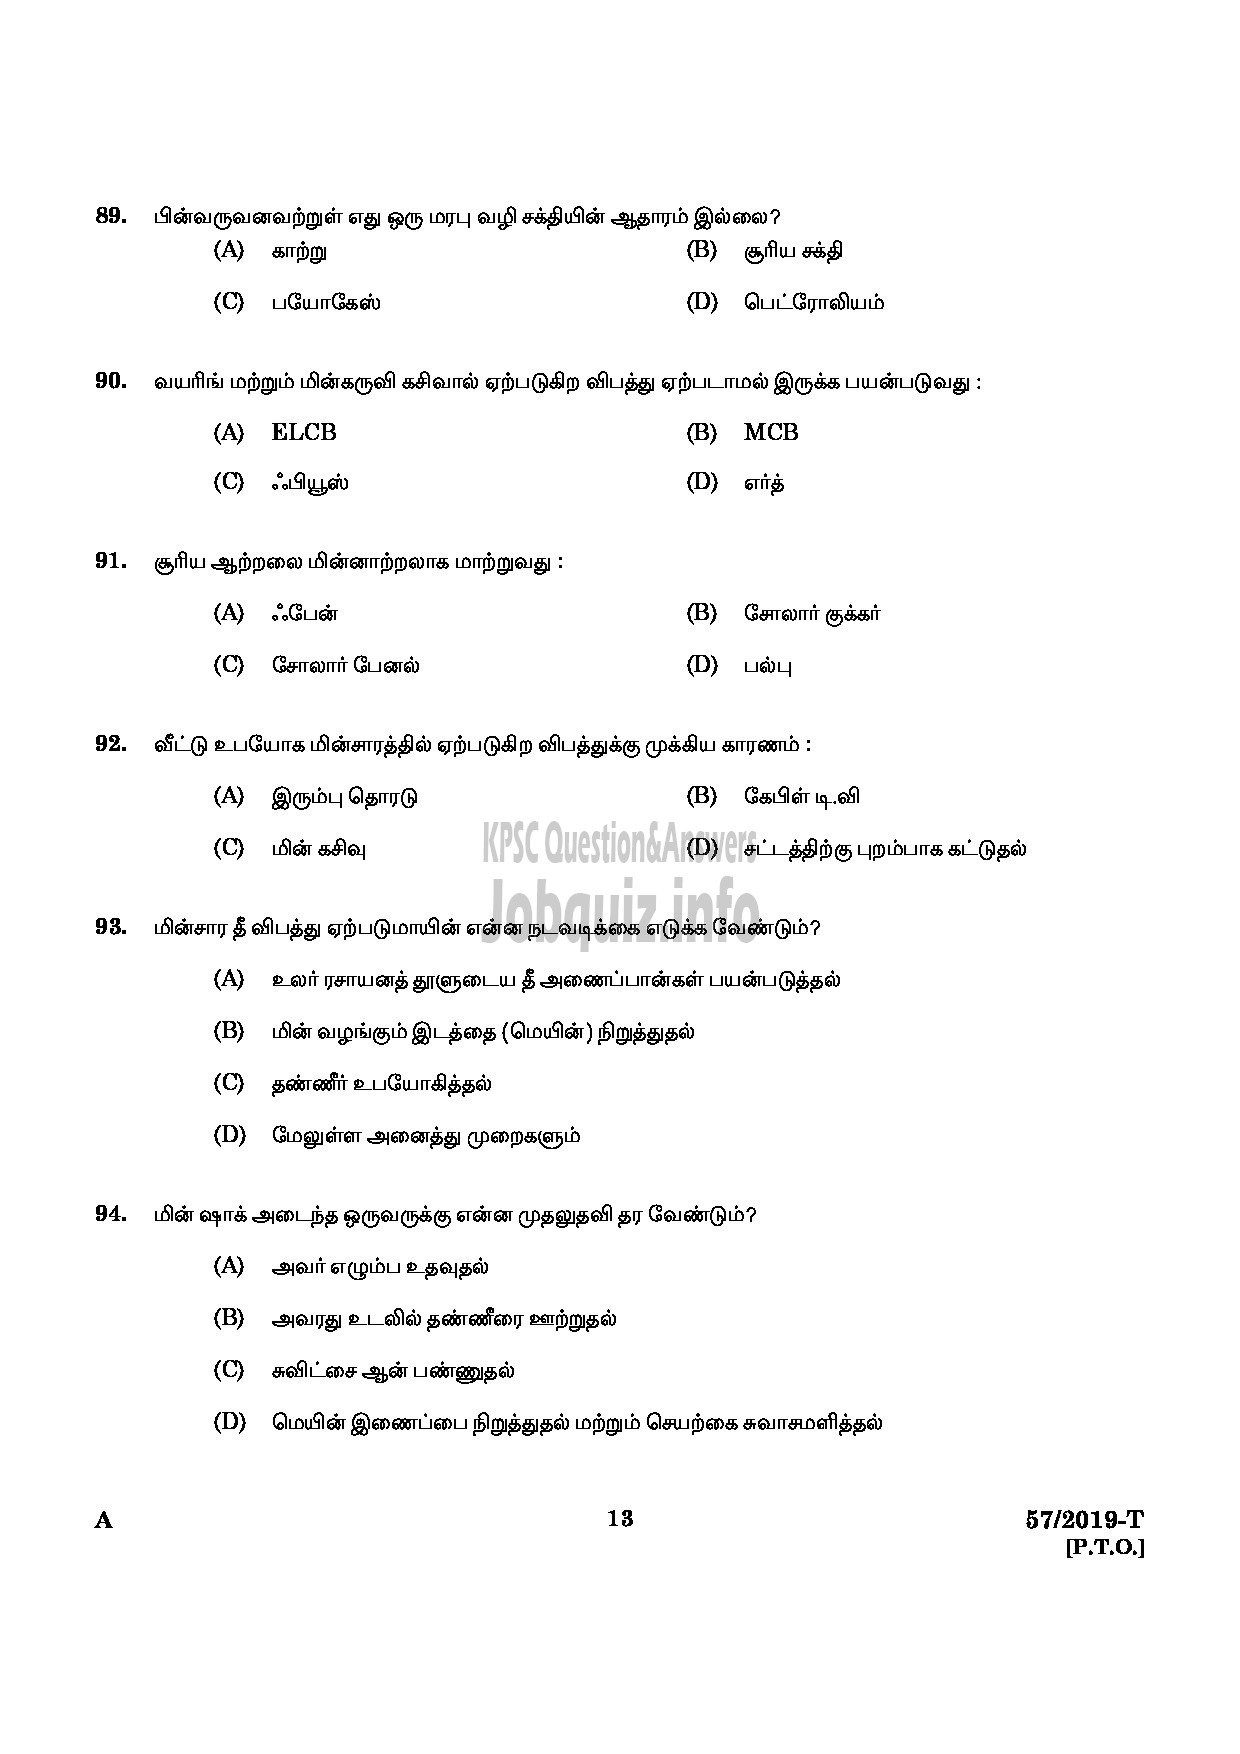 Kerala PSC Question Paper - 	POWER LAUNDRY ATTENDER MEDICAL EDUCATION TAMIL-11